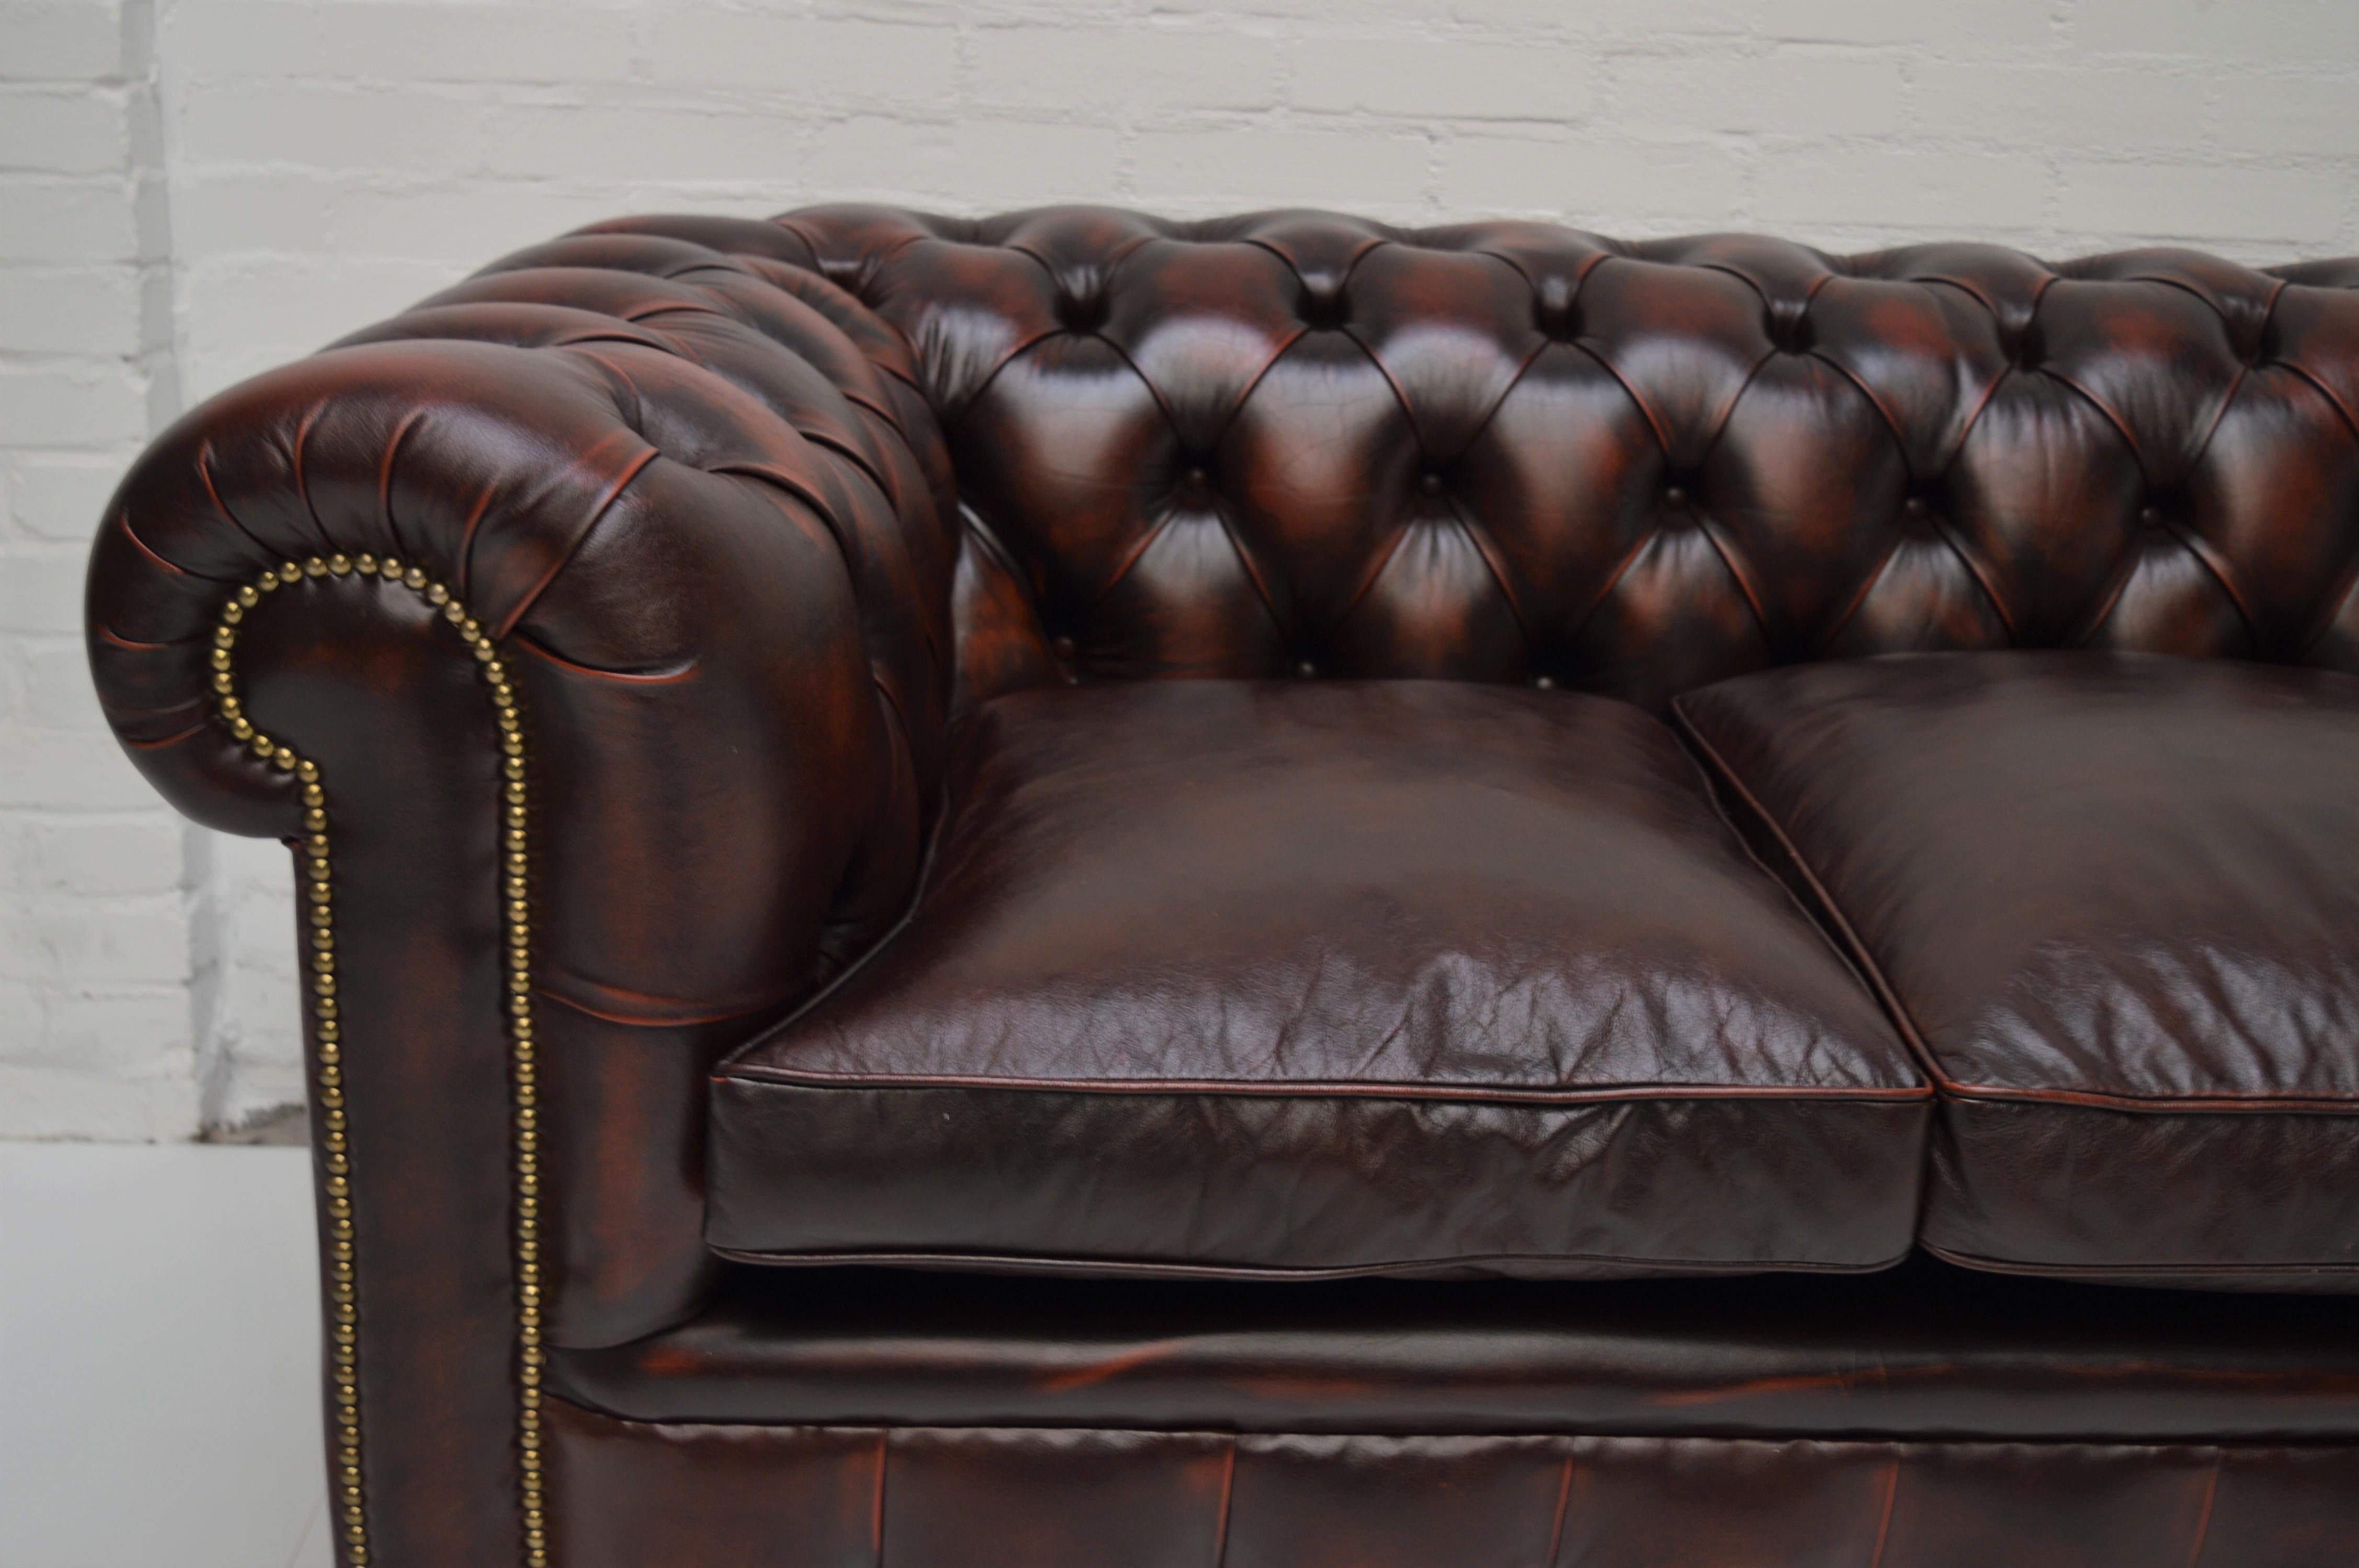 Leather Antique Tan Chesterfield Sofa with Brass Castors / Wheels For Sale